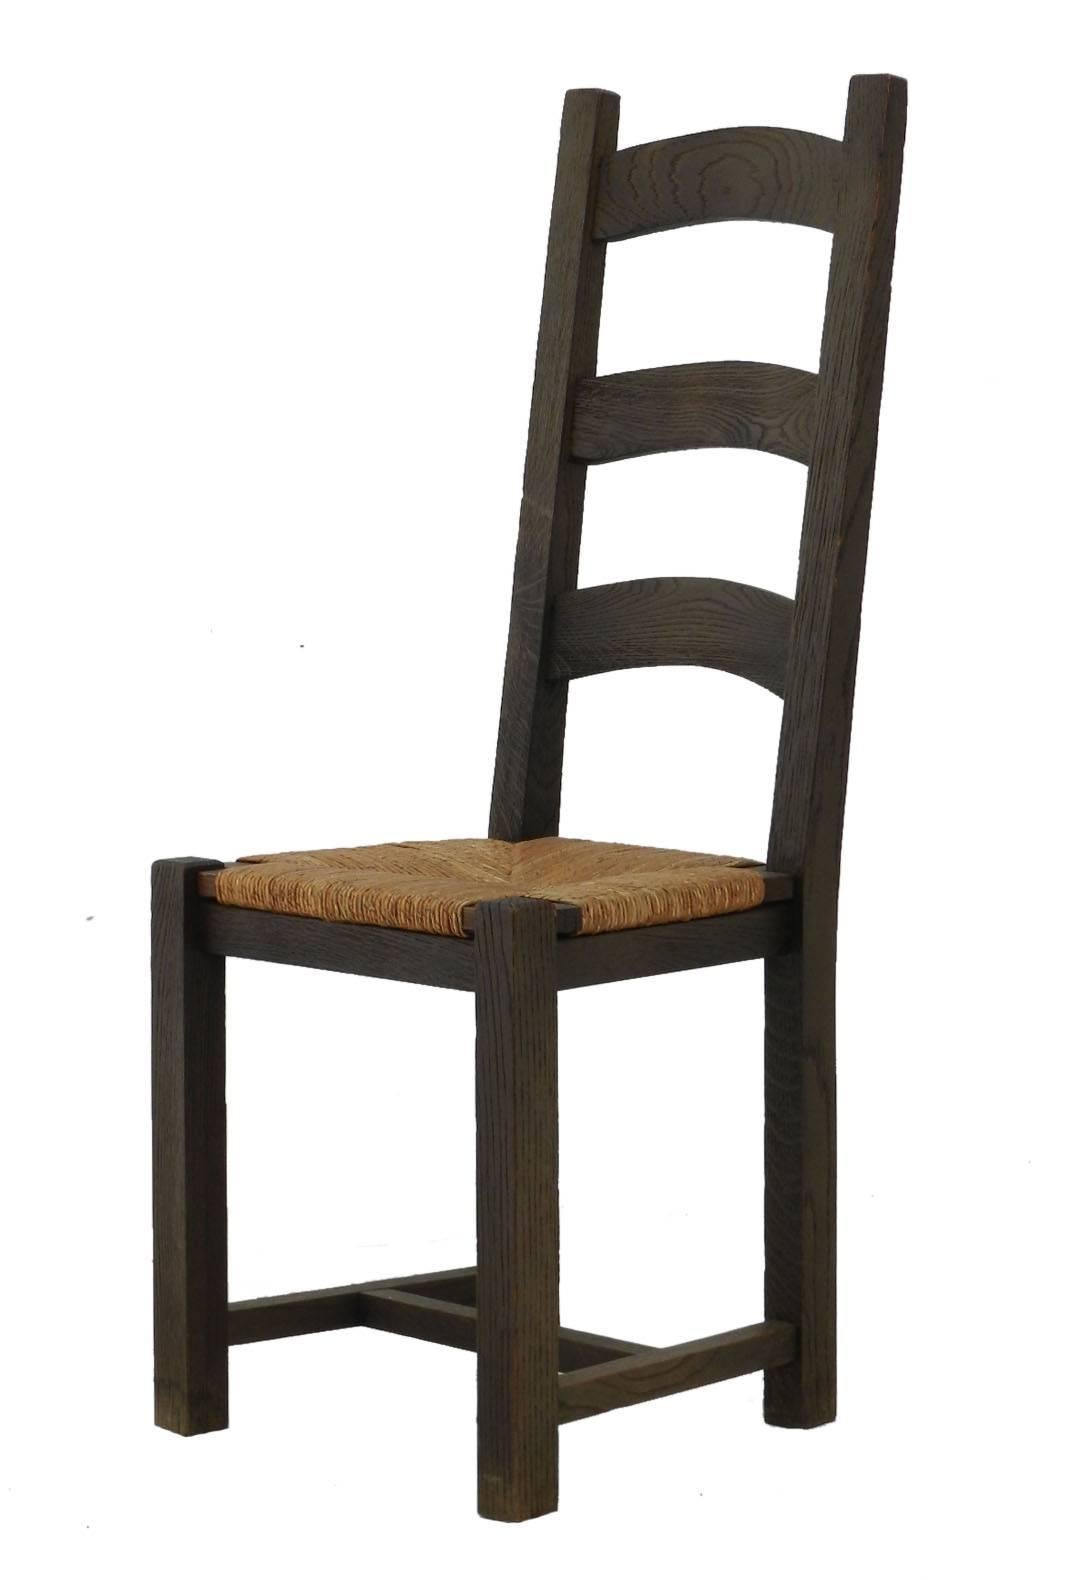 Six dining chairs French 20th century ladder back rush seat Shaker style. 
Free Shipping Options available 
We will always do our best to offer free shipping or at the lowest possble price please ask
 